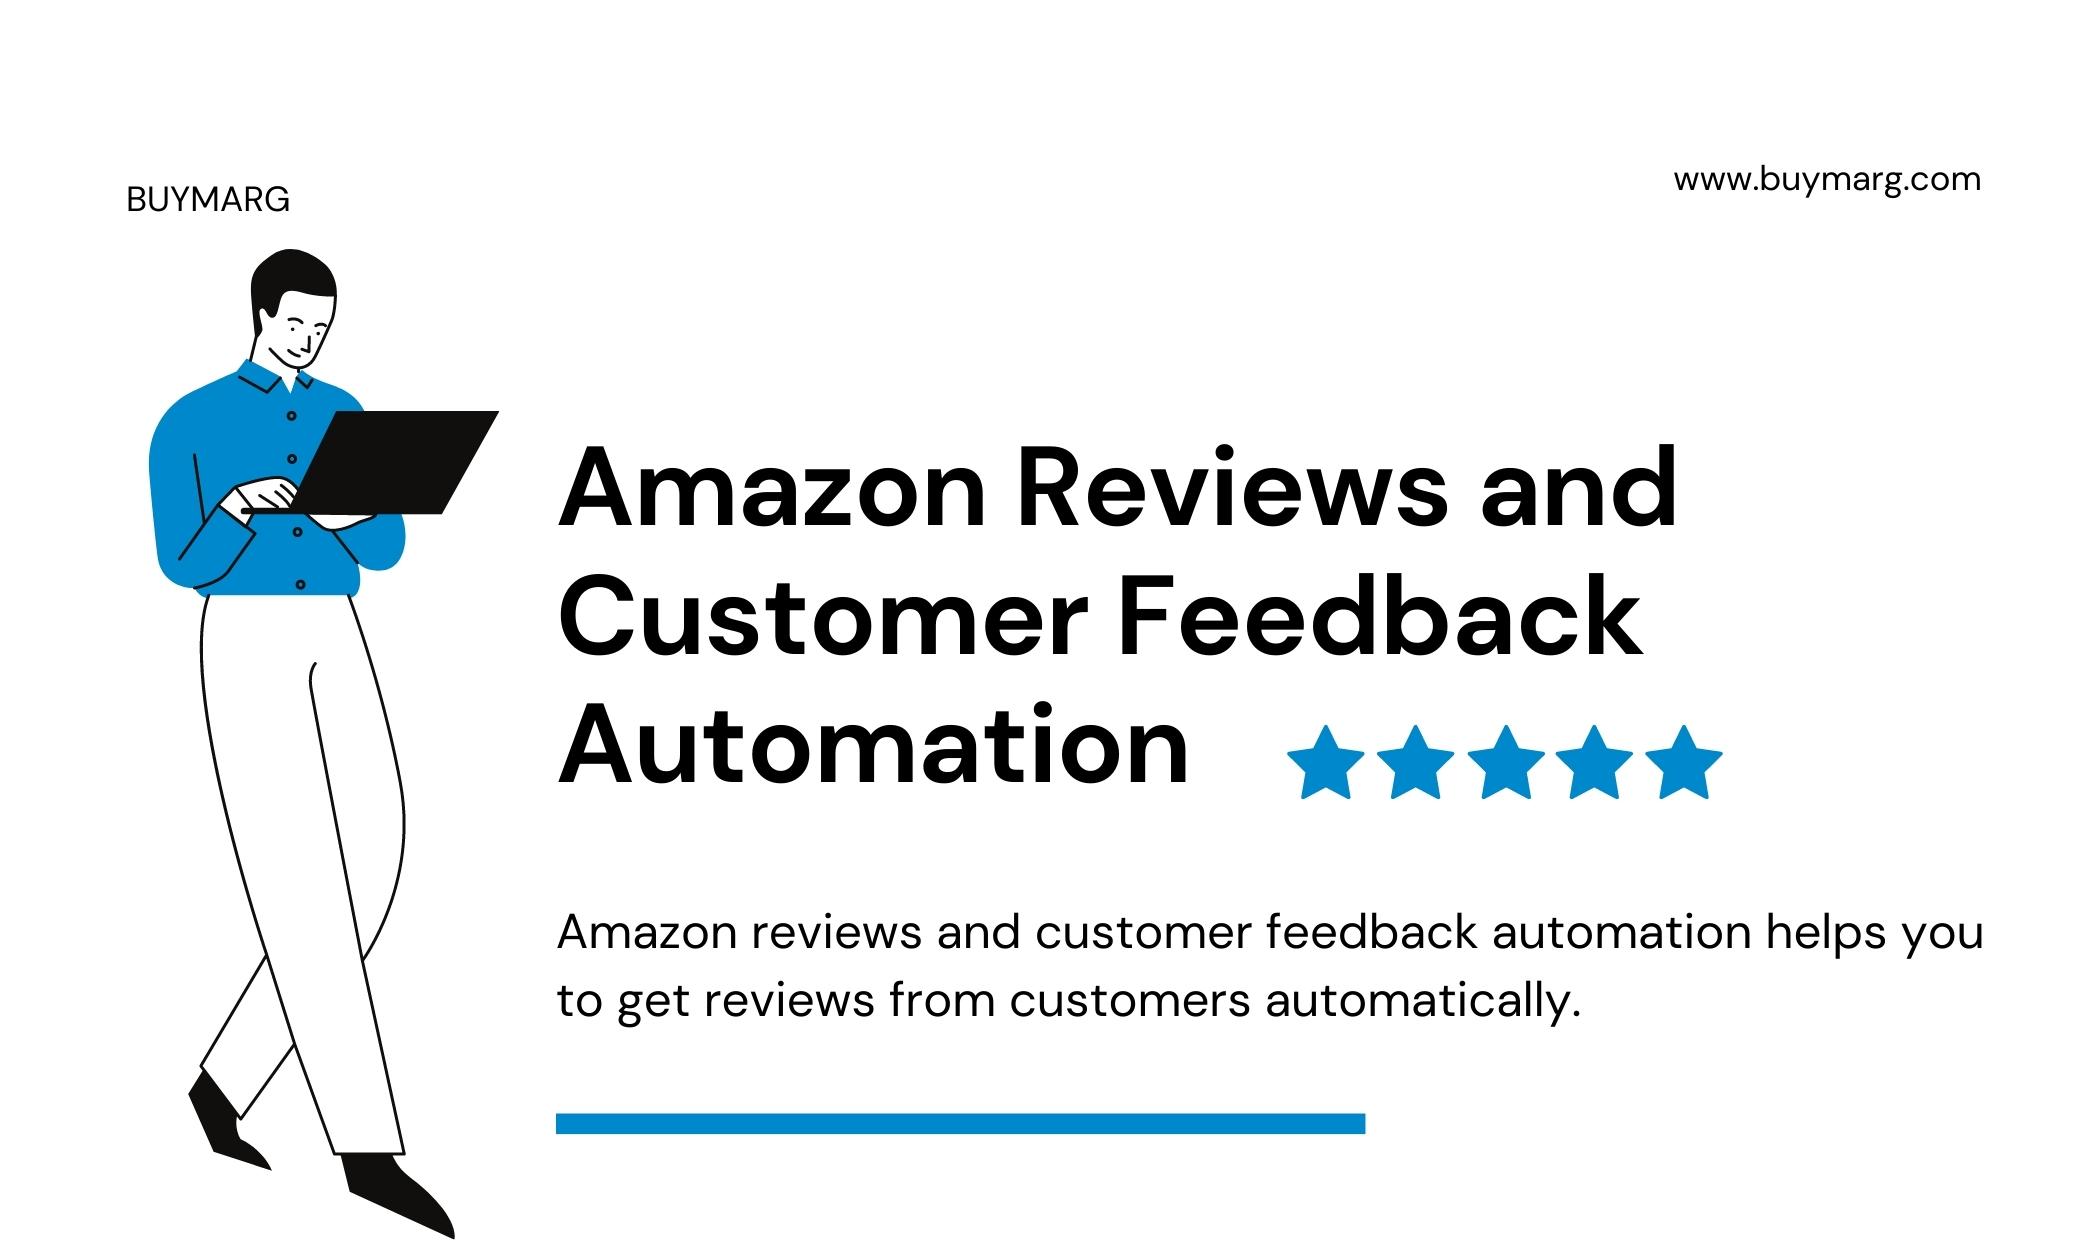 Amazon Reviews and Customer Feedback Automation